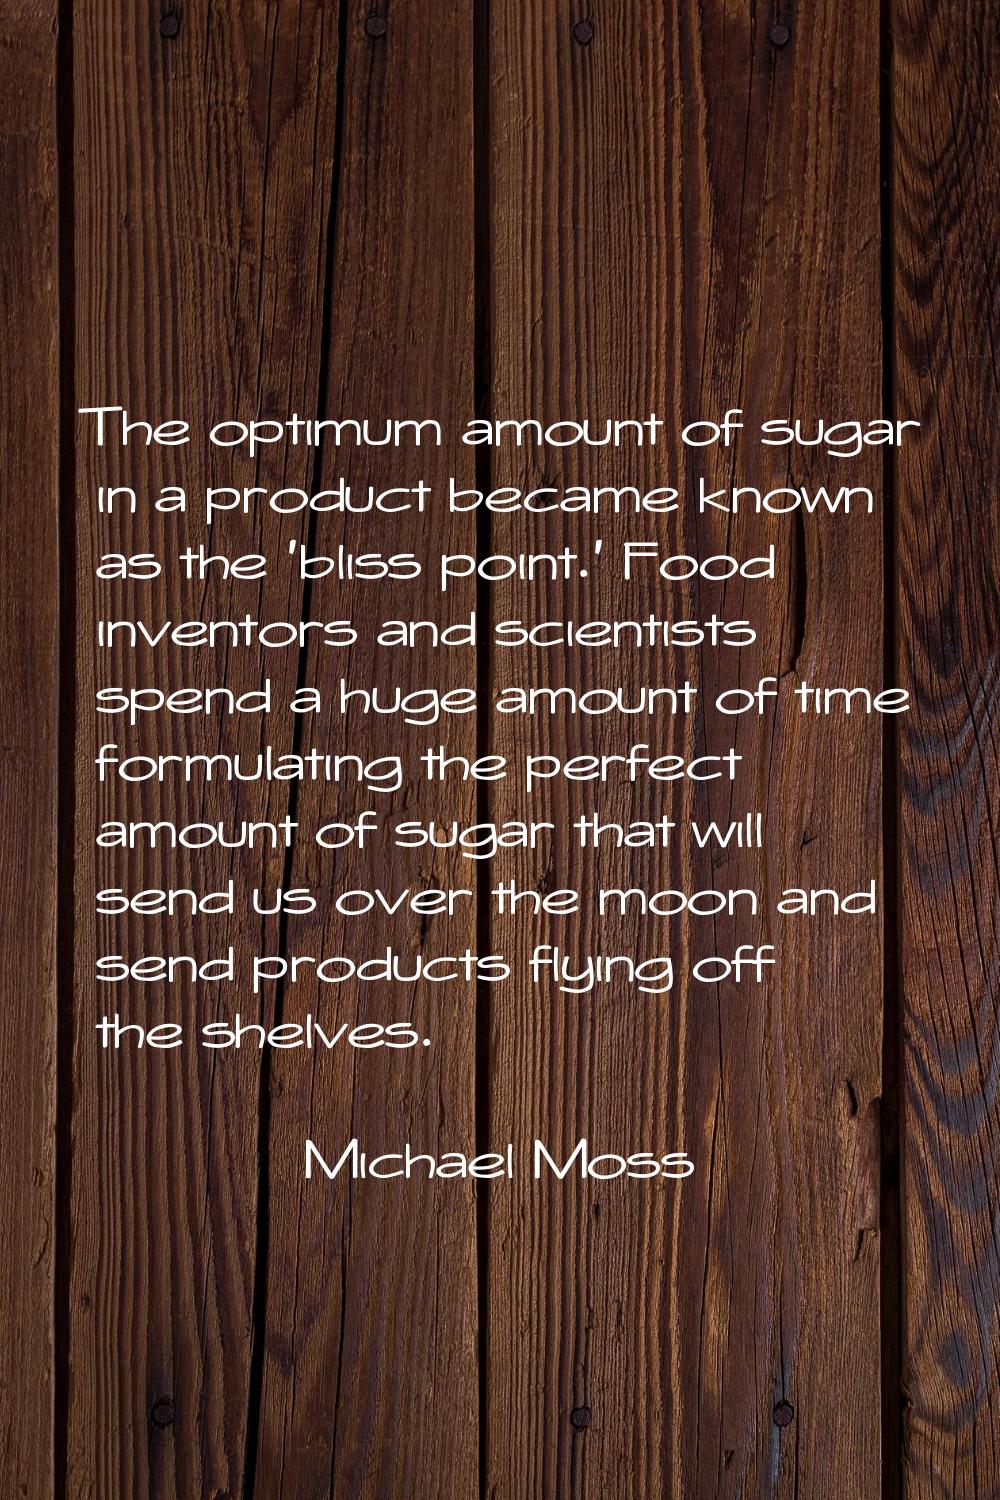 The optimum amount of sugar in a product became known as the 'bliss point.' Food inventors and scie